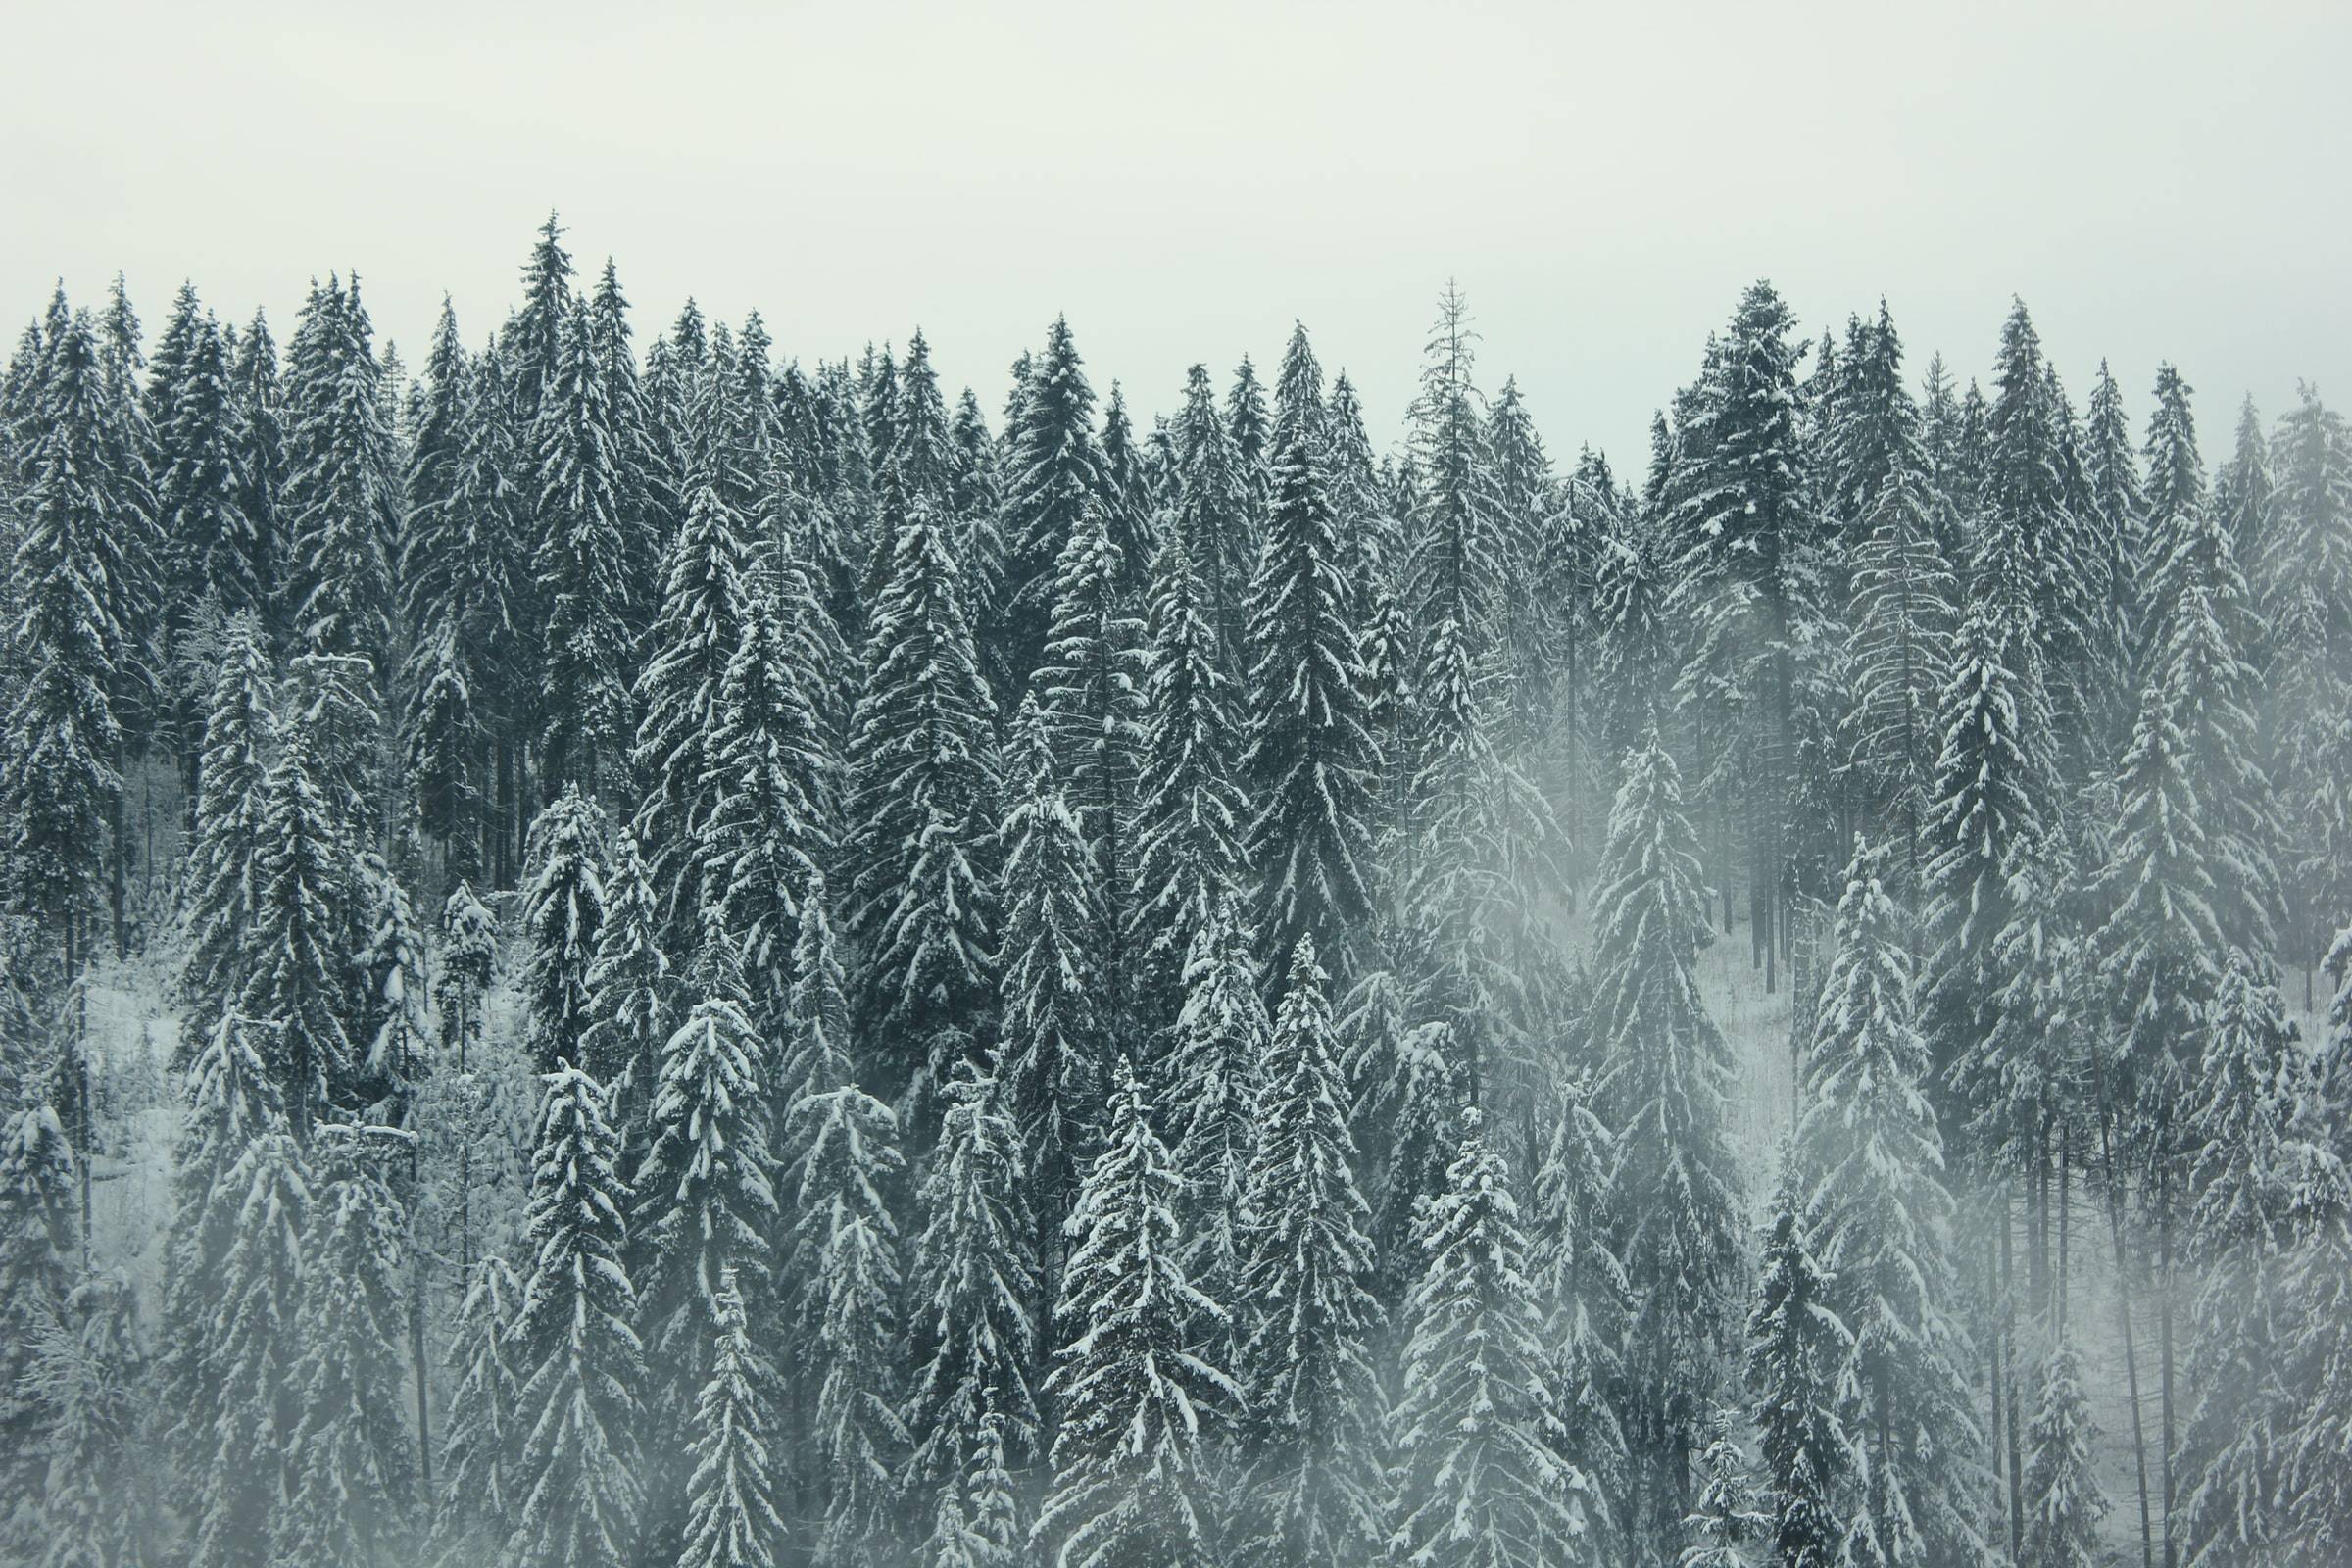 Snow-covered pine trees